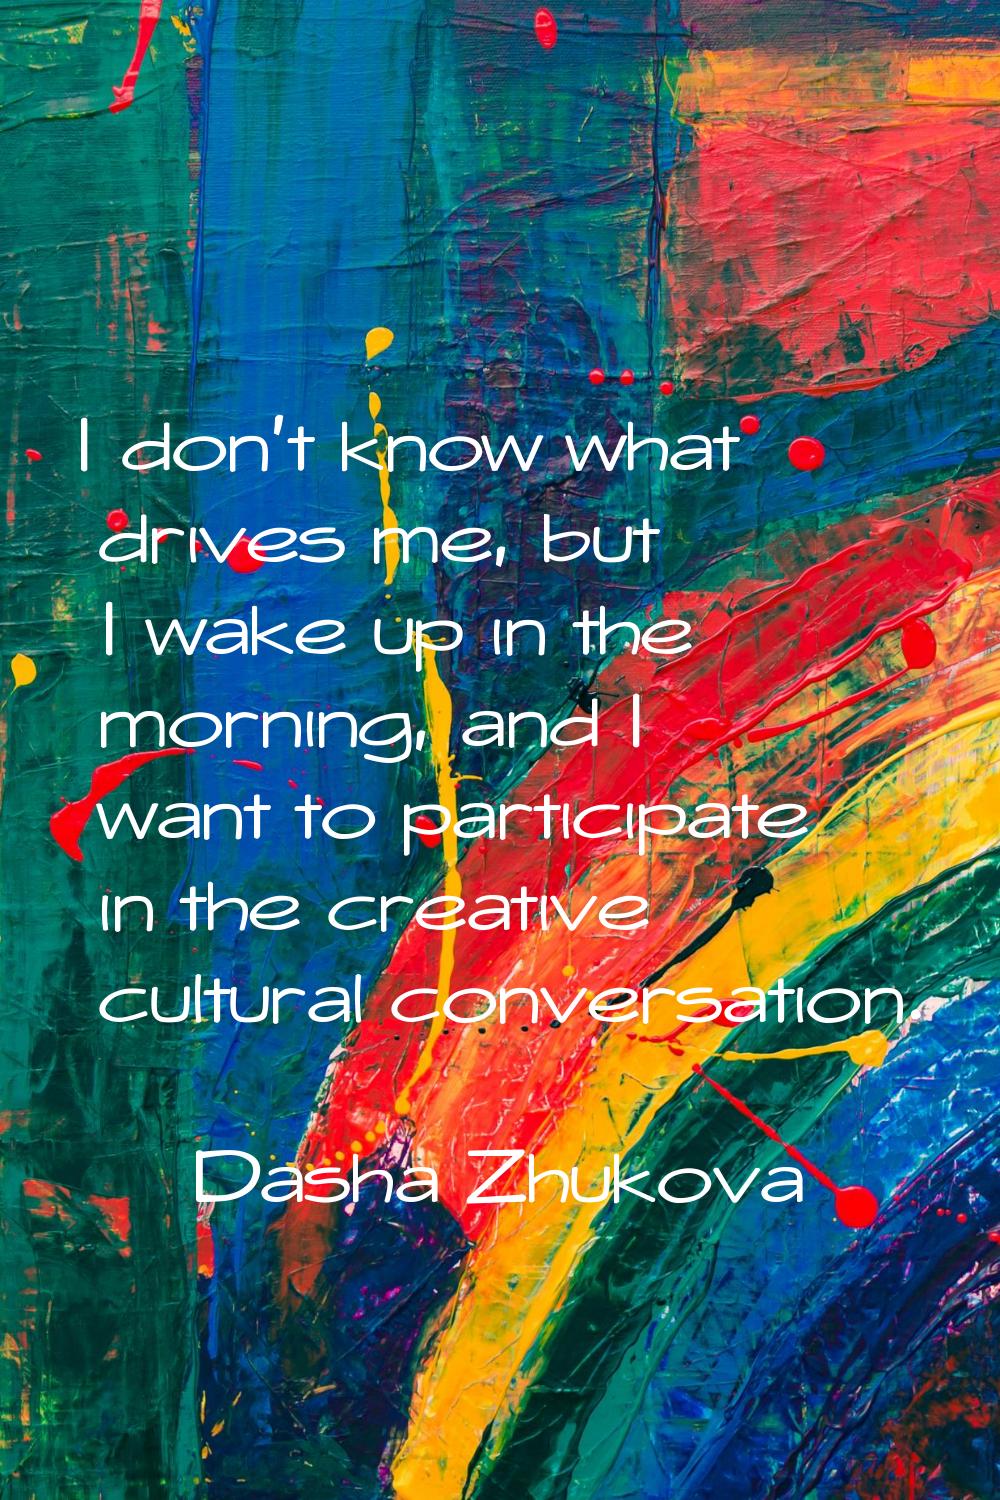 I don't know what drives me, but I wake up in the morning, and I want to participate in the creativ